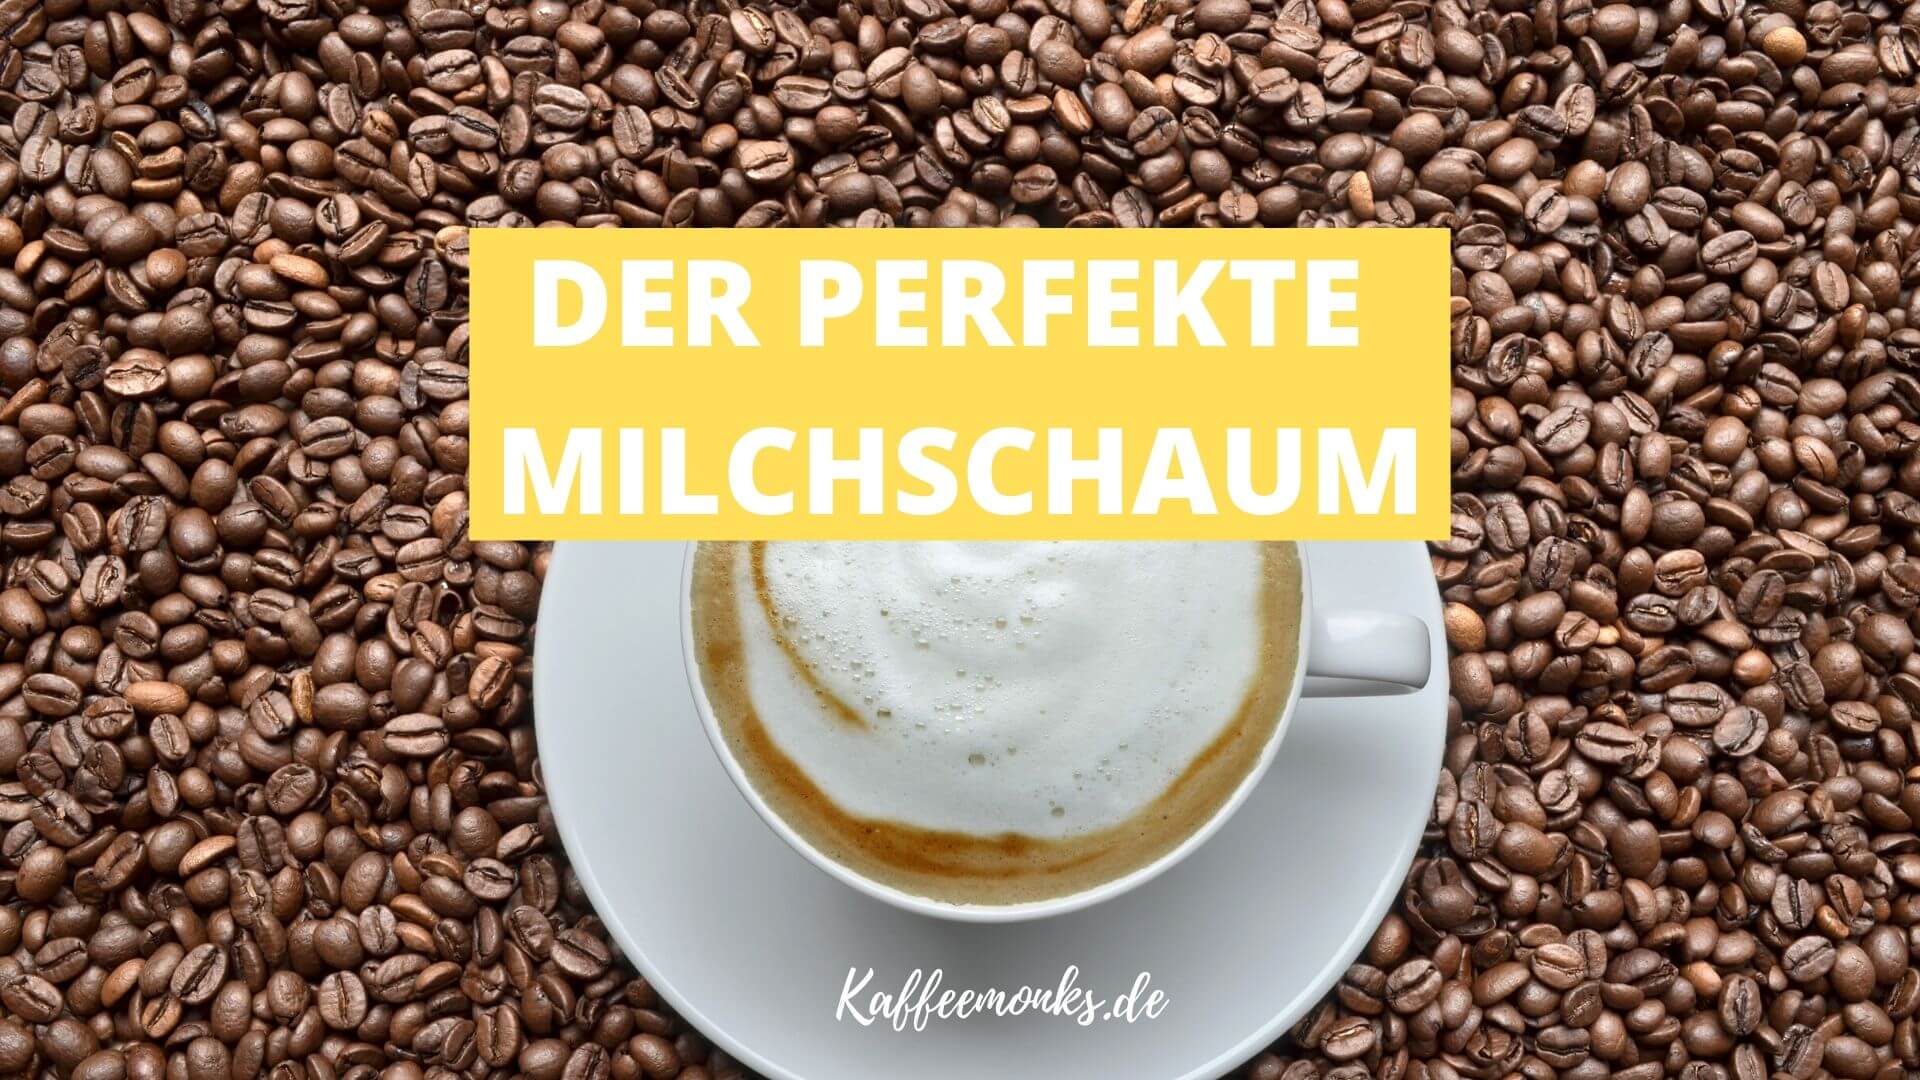 You are currently viewing MILCHSCHAUM SELBER MACHEN